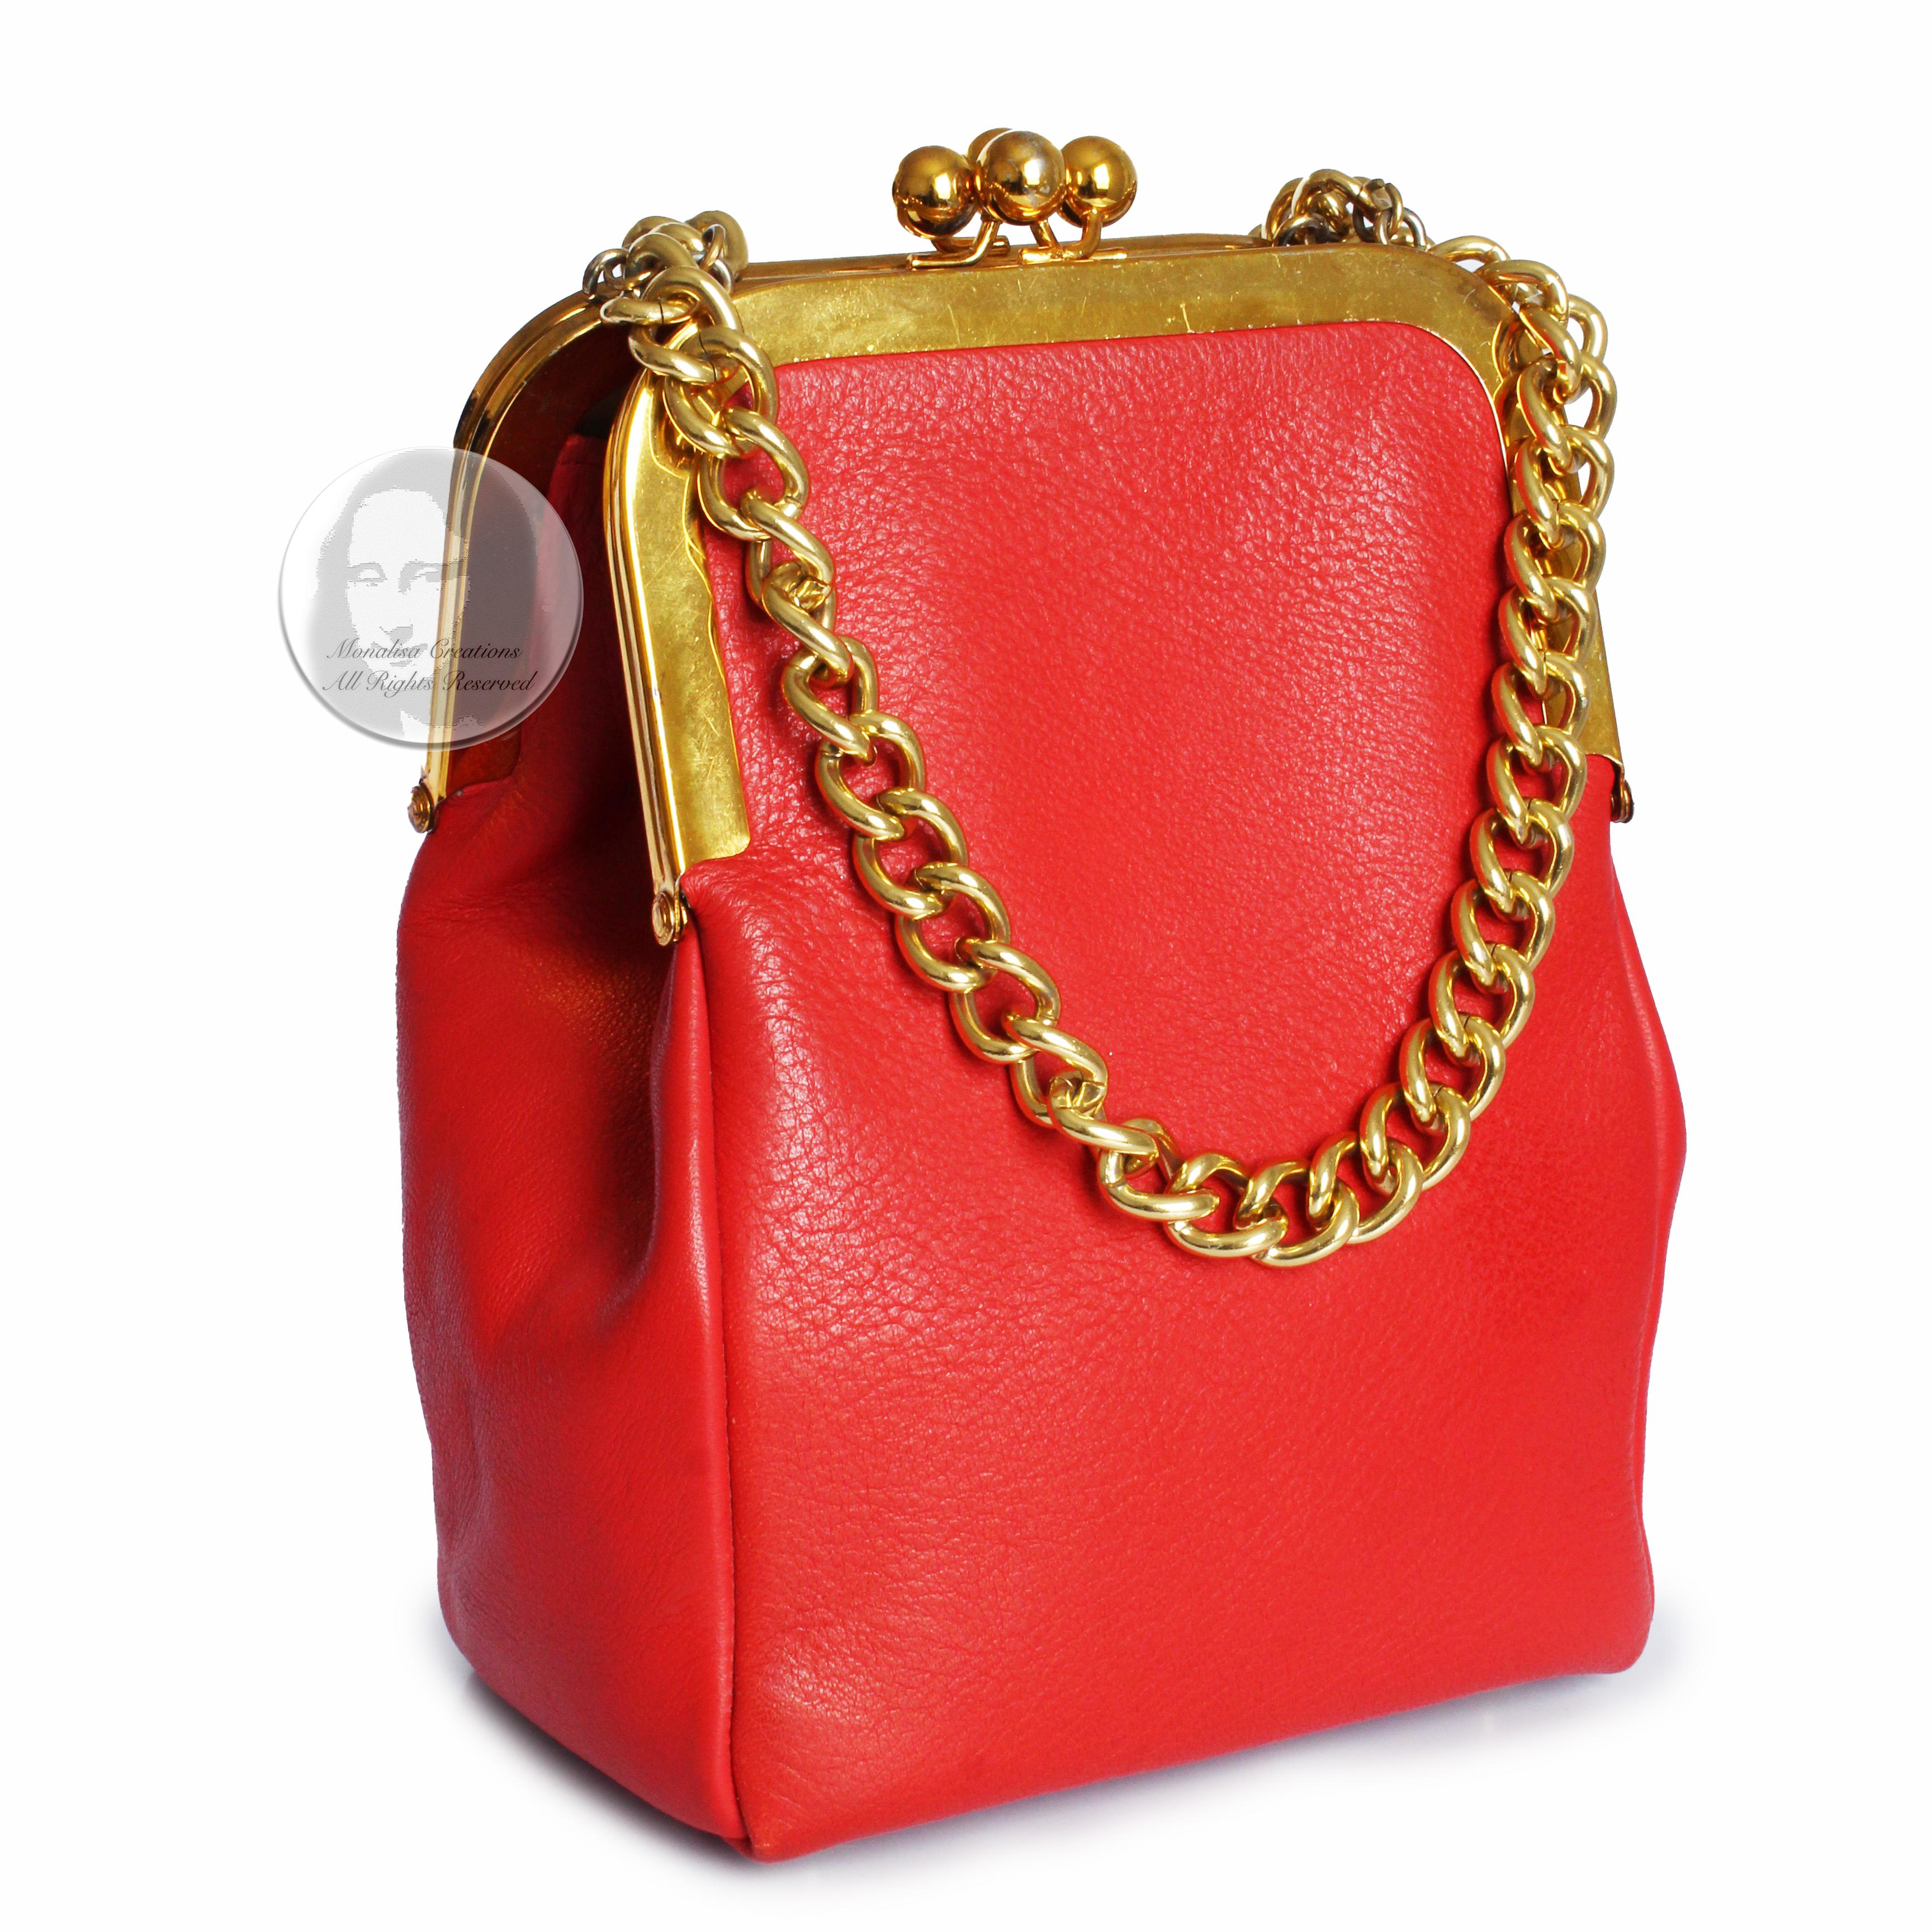 Authentic, preowned, vintage 60s Bonnie Cashin for Coach Double Kiss Lock bag. A chic vintage bag in a hard-to-find color! Made from coral-hued red leather, it's lined in Cashin's signature striped fabric and features double chain straps and gold